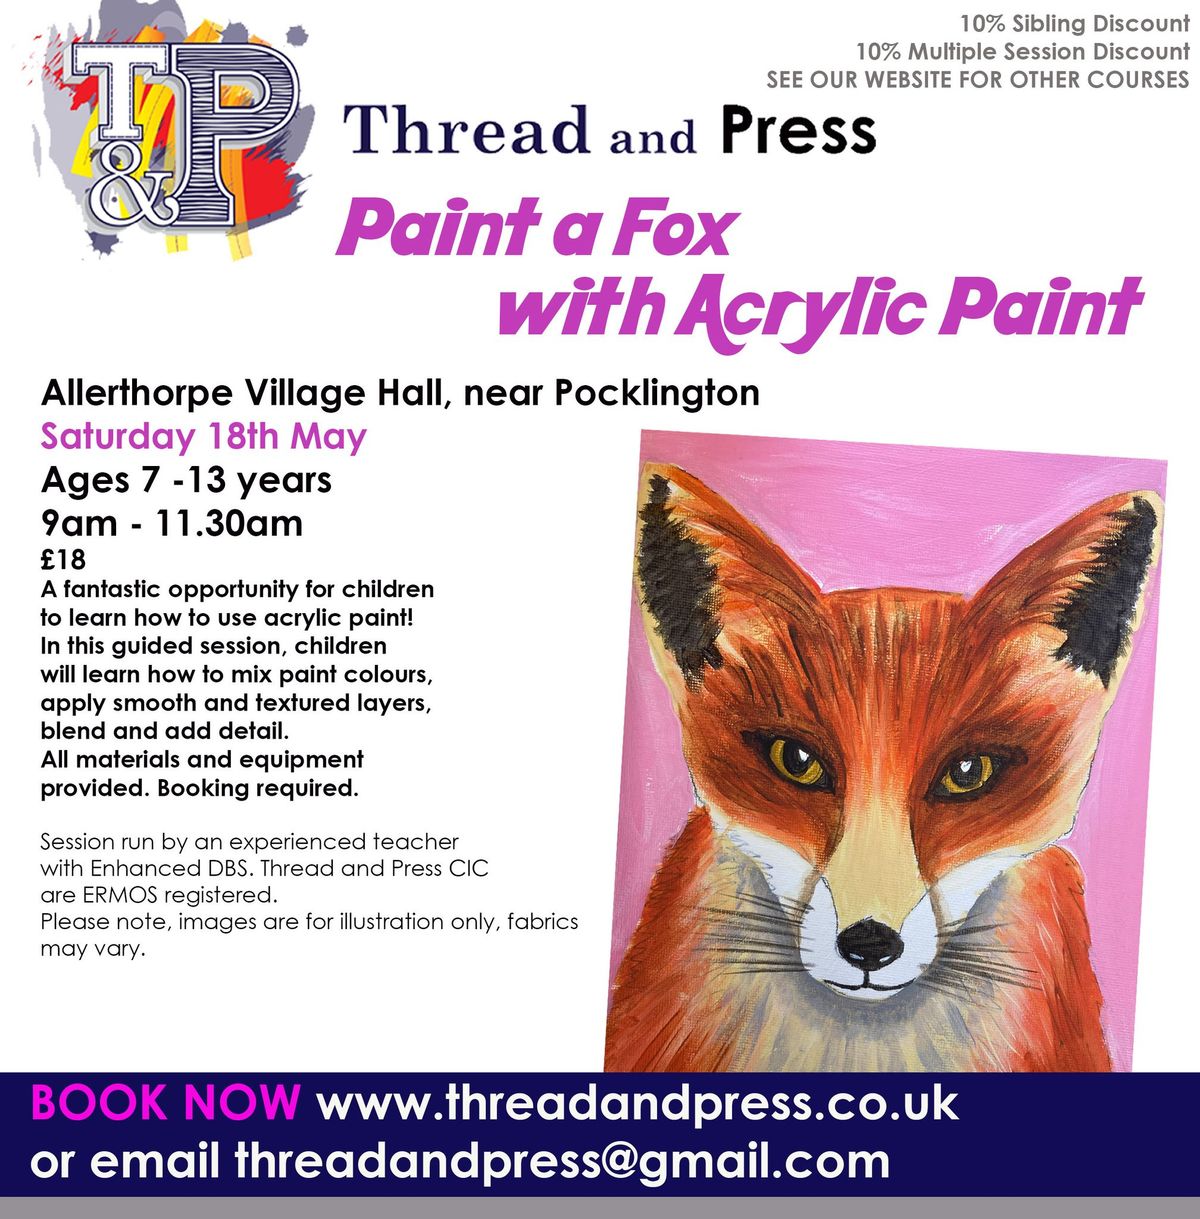 Paint a Fox - Acrylic Paint Ages 7-13 years